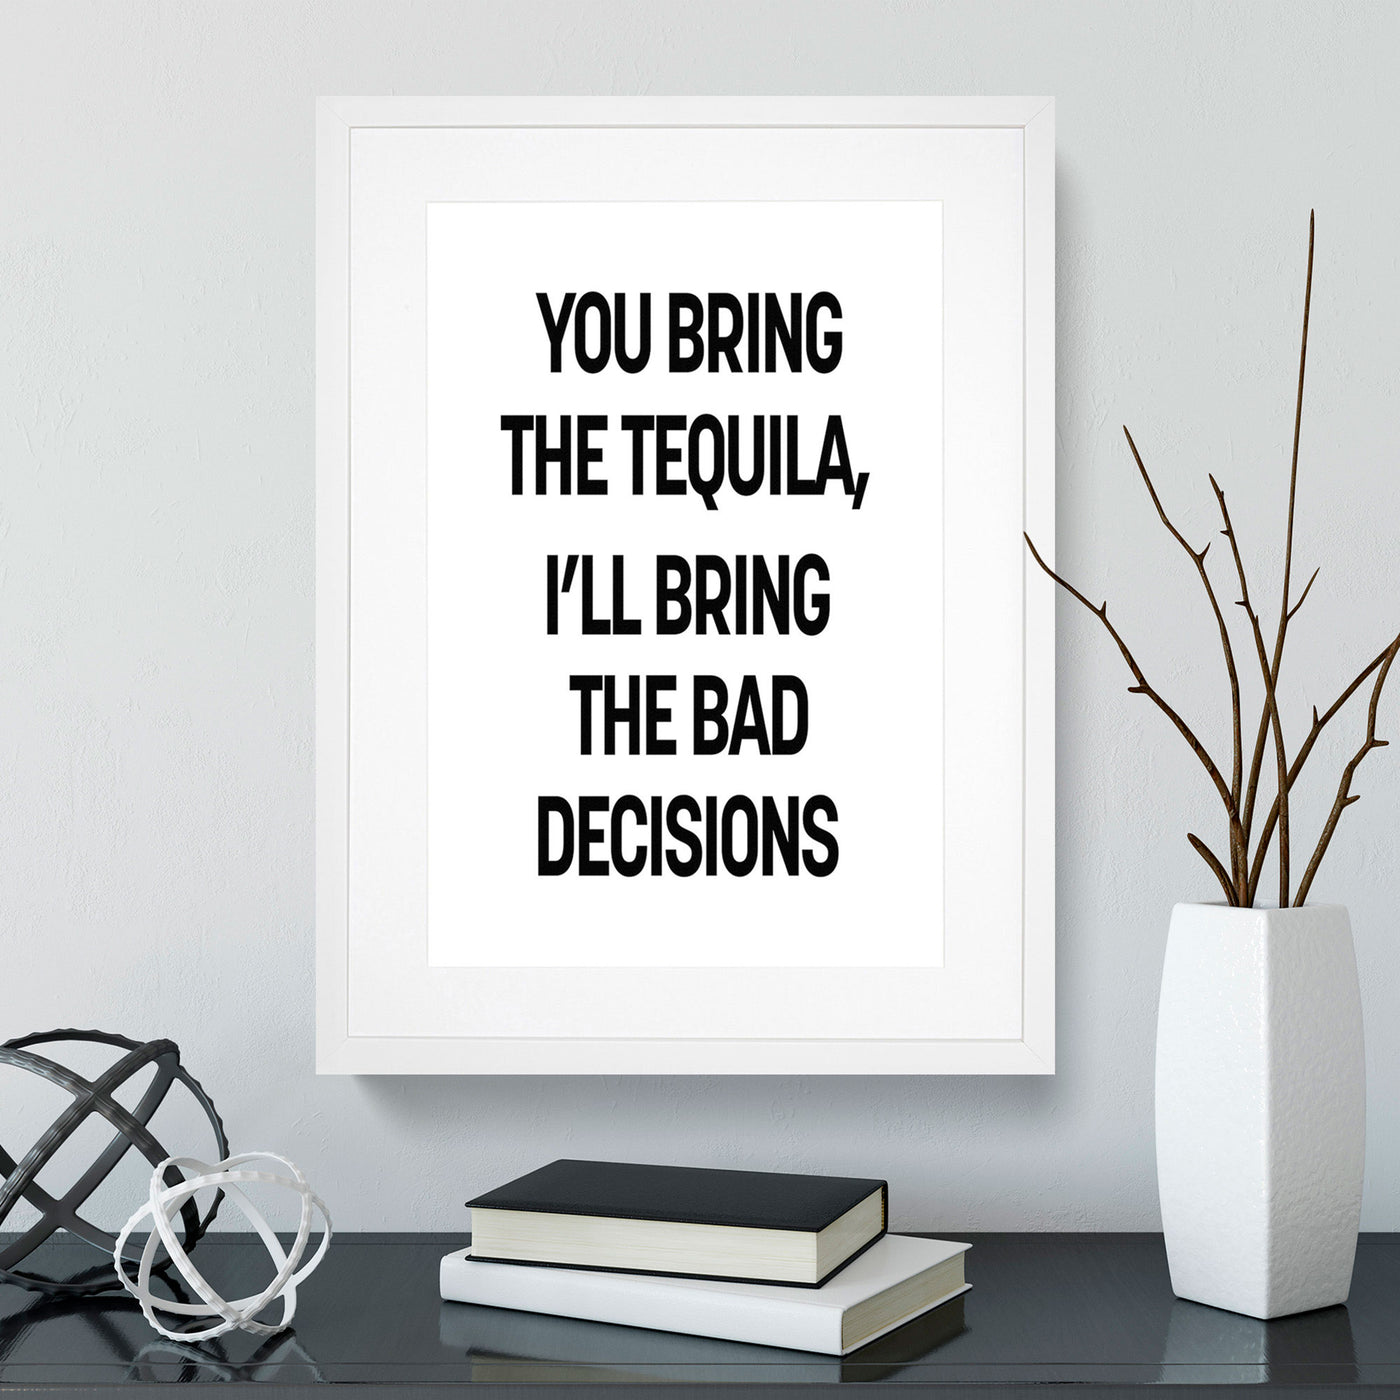 Bring the Tequila